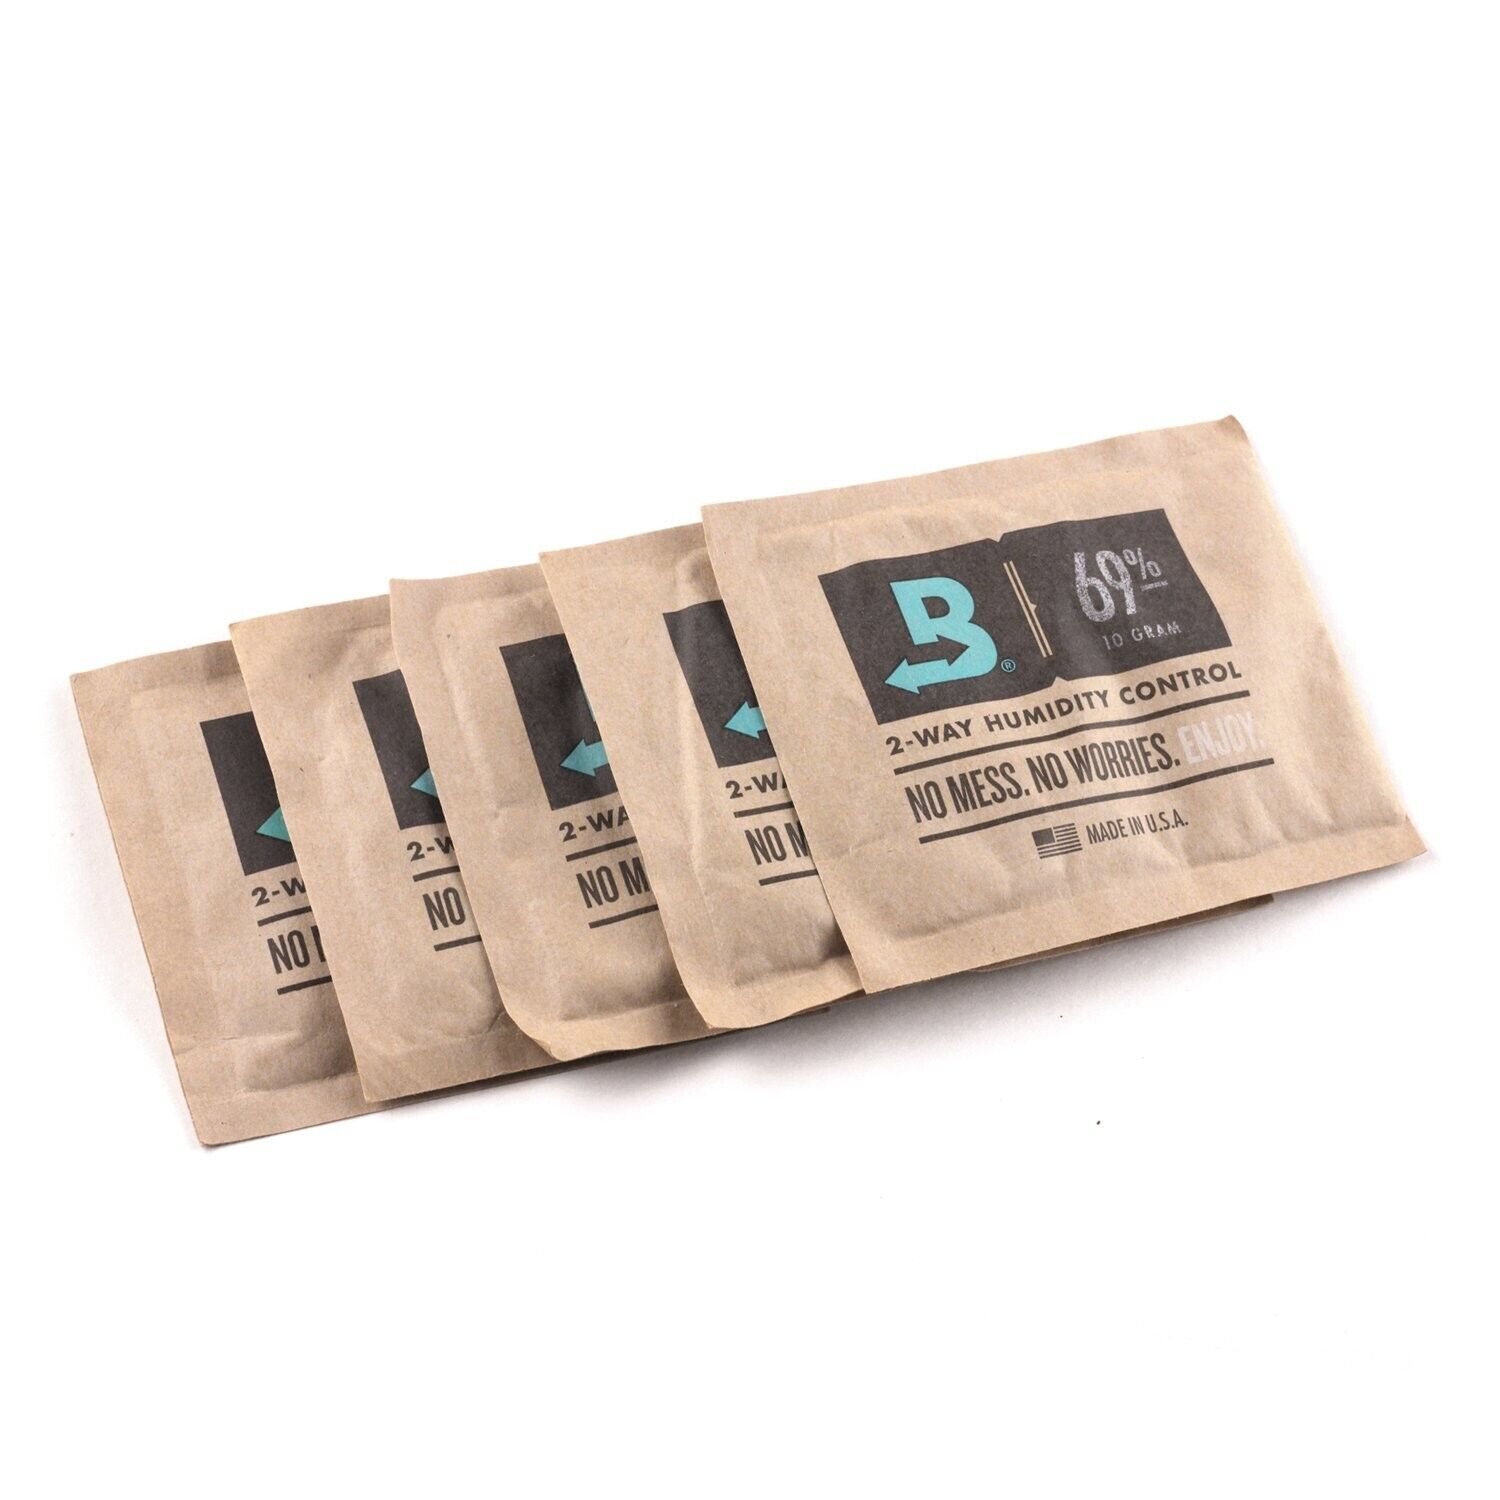 Boveda 69% RH 2-Way Humidity Control - Protects & Restores - Size 10 - 10 Count